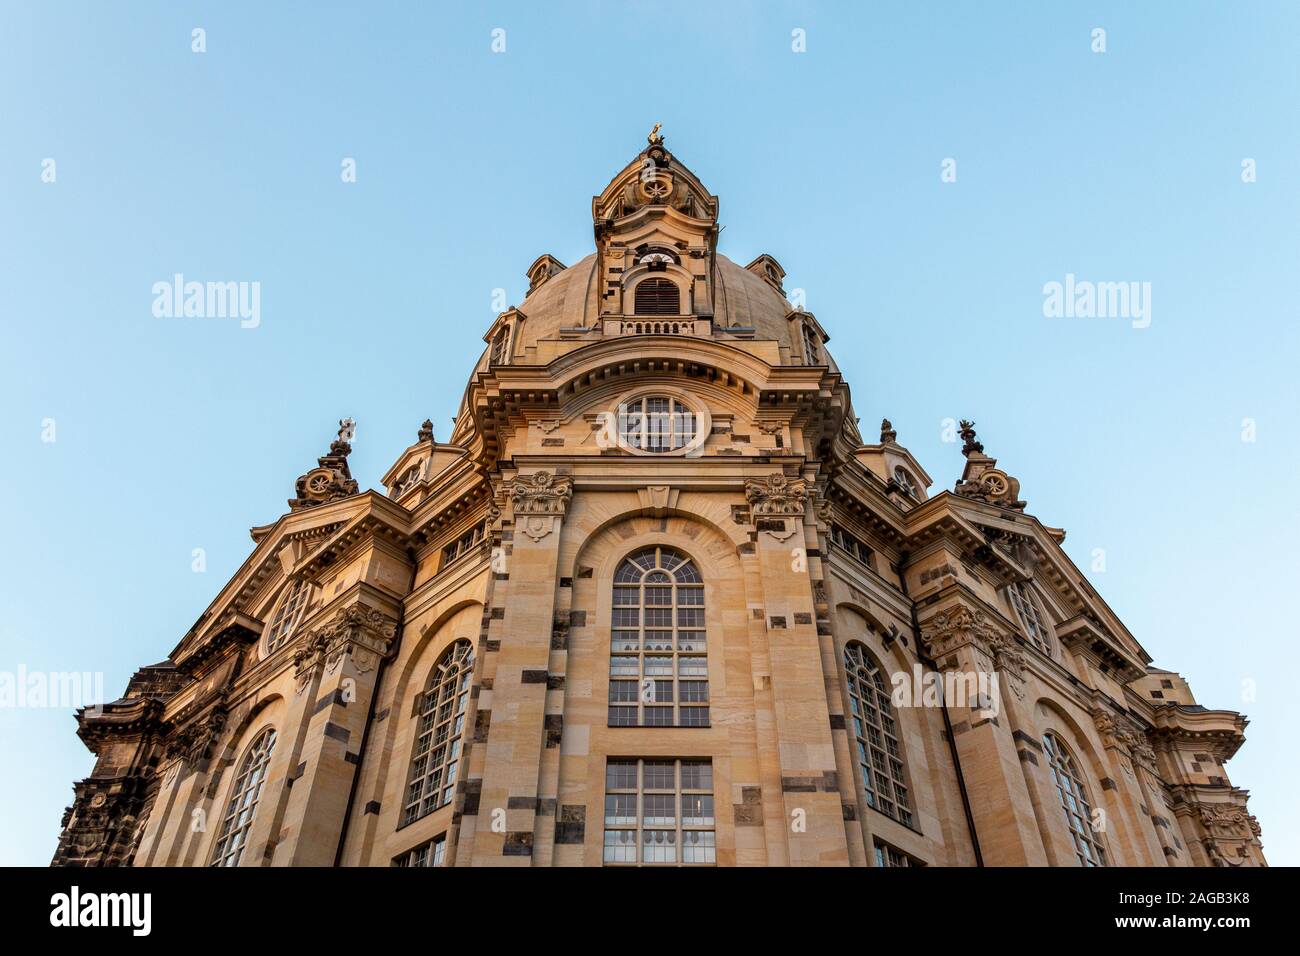 A low angle show of the facade of Frauenkirche (Our Lady's church) in Dresden, Germany, just before sunset. Stock Photo